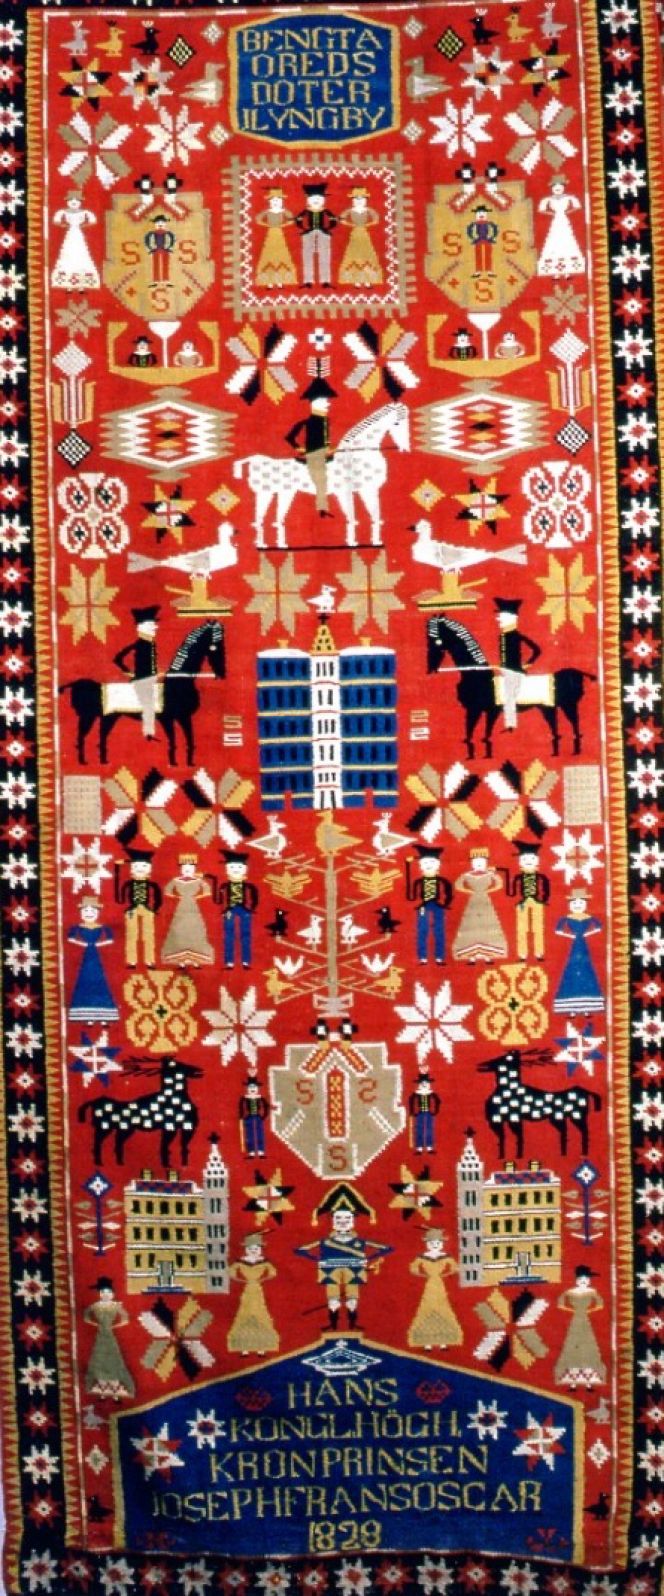 This is a unique double interlocked tapestry woven by the professional weaver Bengta Oredsdotter in  Lyngby 1828, dedicated to the crown prince Joseph Frans Oscar (1799-1859). It is unknown if  Sweden’s king-to-be received this decorative textile. Private owner. (Photo: The IK Foundation, London).